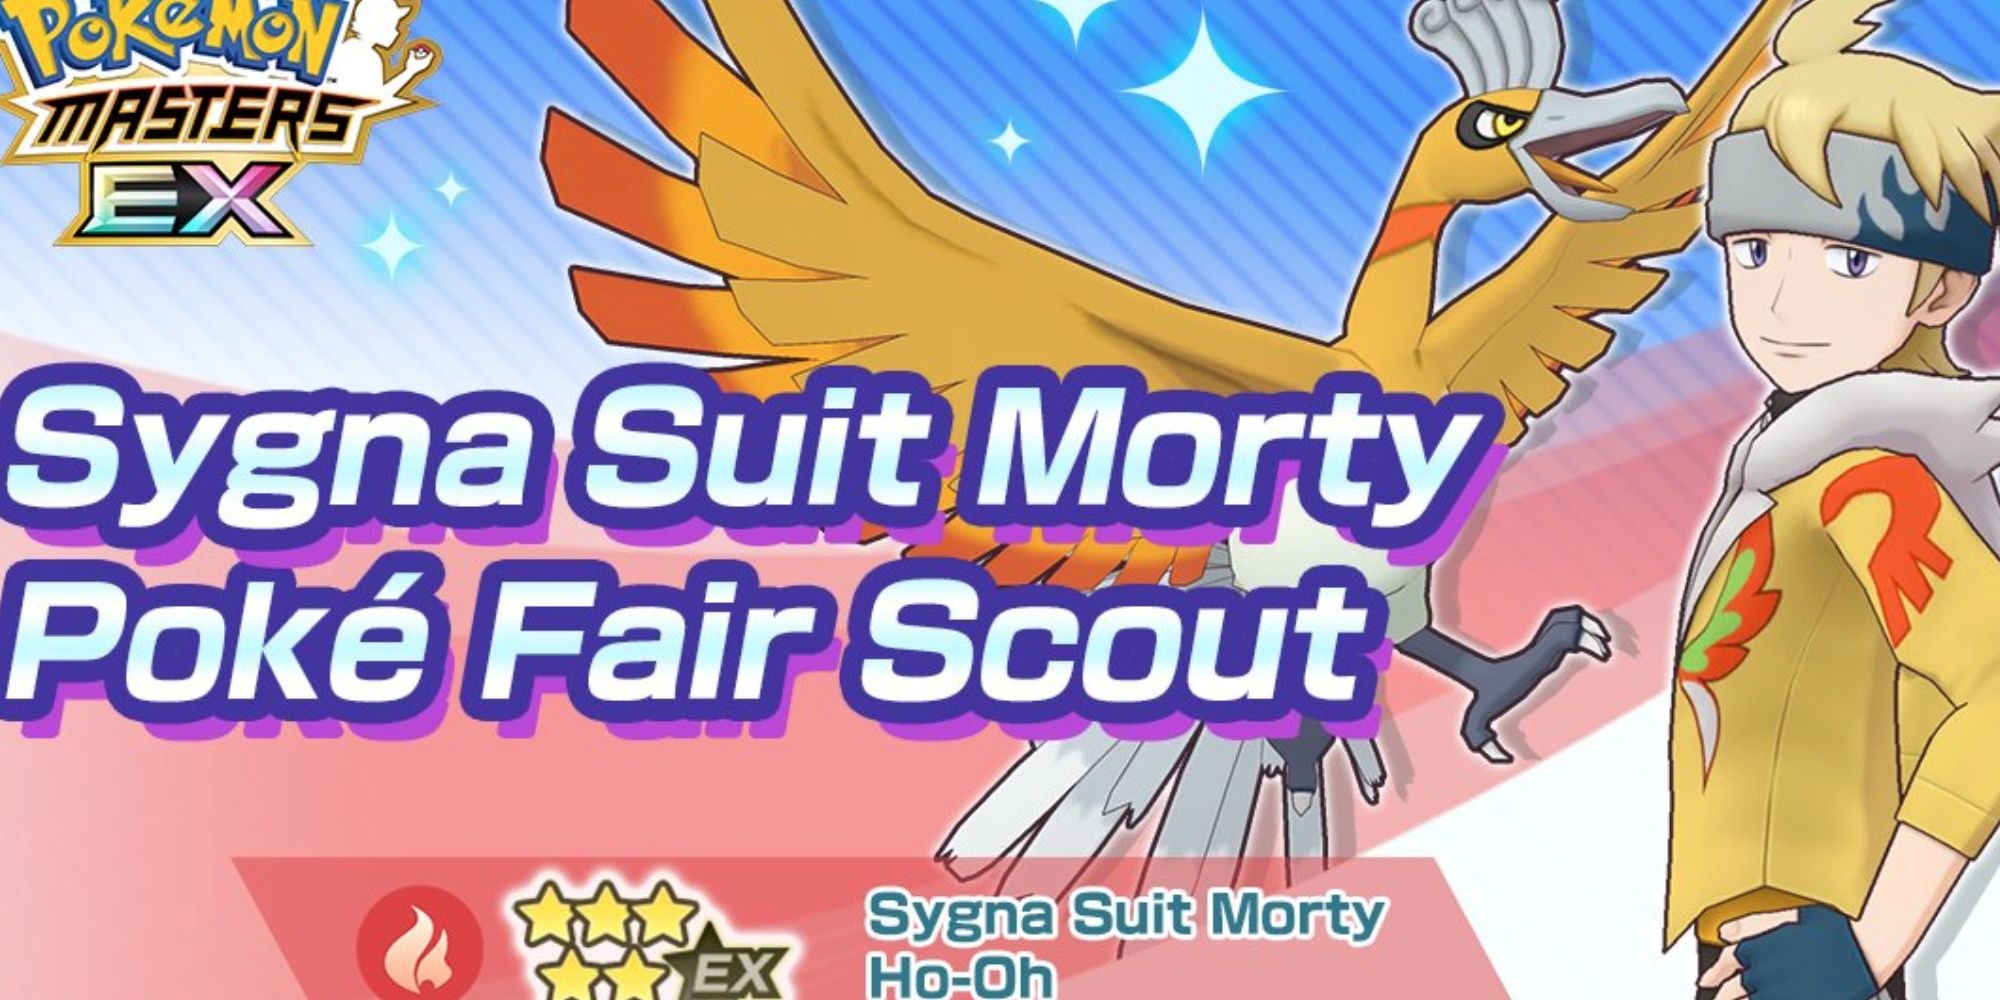 Pokemon Masters EX Best Supports Morty & Ho-Oh pose on their debut banner.